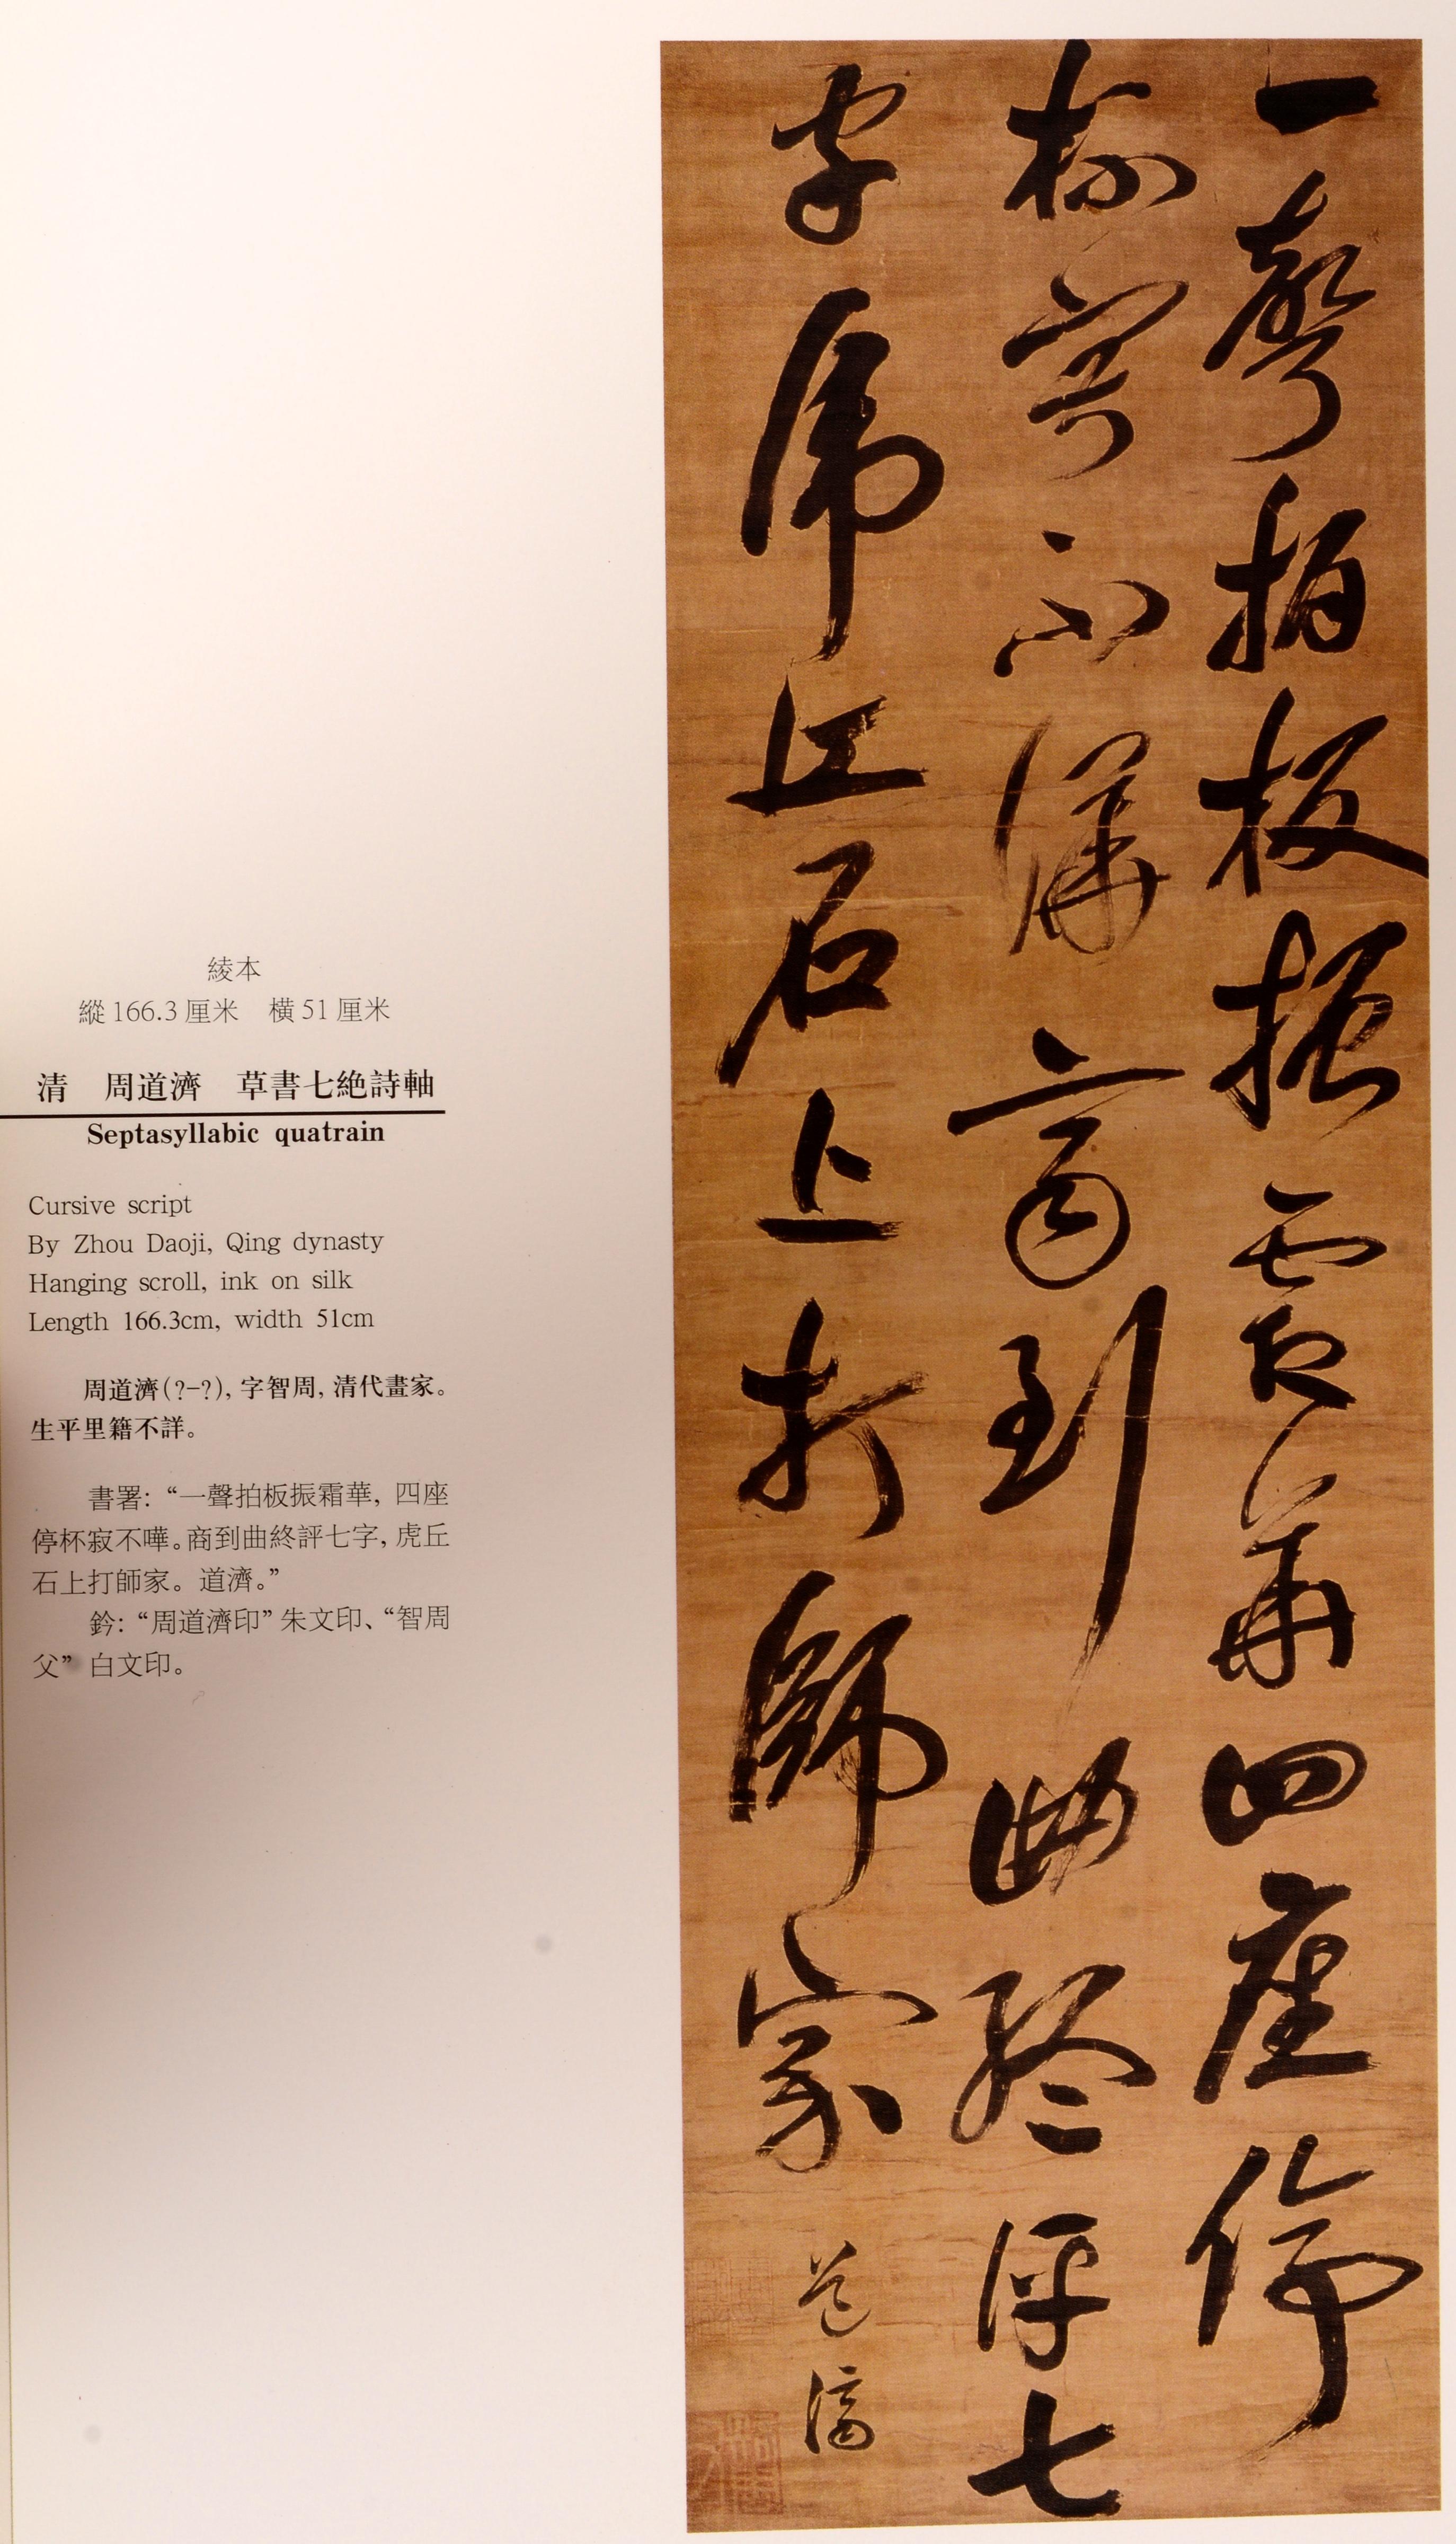 Selections from the Paintings and Calligraphy Donated to the Shanghai Museum from the Ching Banlee Liangtuxuan Collection. Published by Shanghai Museum, Shangahai, China, 2002. 1st Ed softcover. Lu Yifei, the outstanding Chinese painter, excelled in